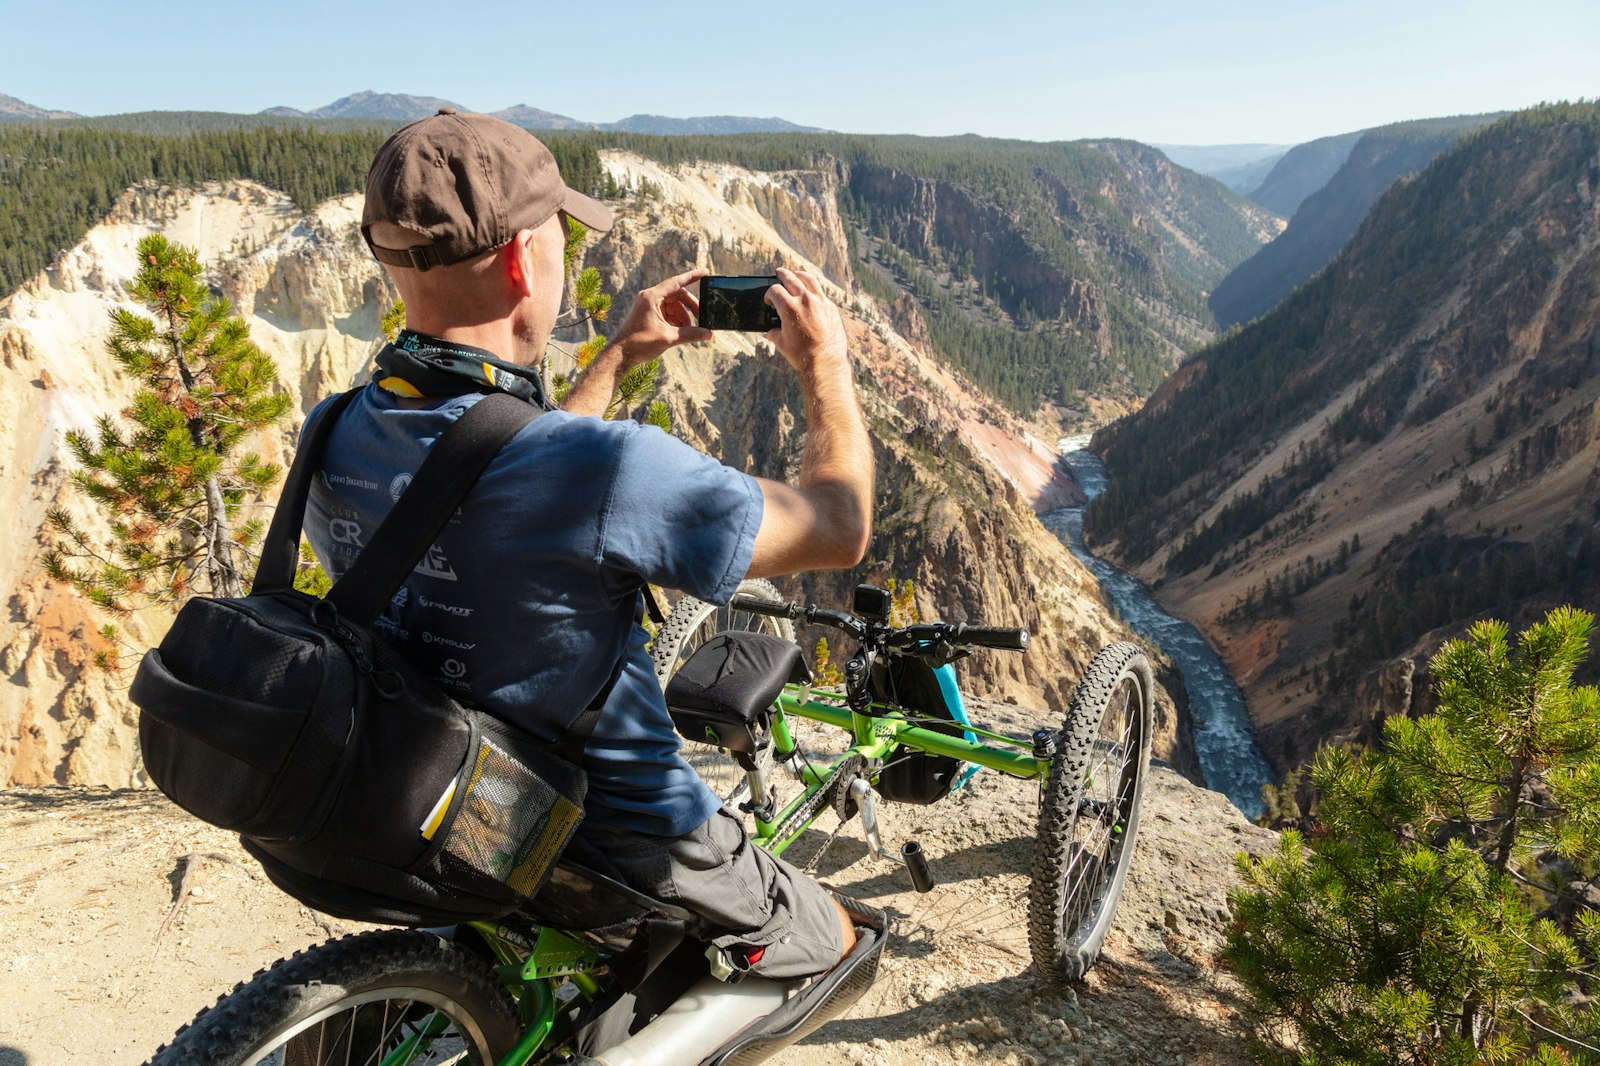 Photographing the Grand Canyon of the Yellowstone from an off-road wheelchair